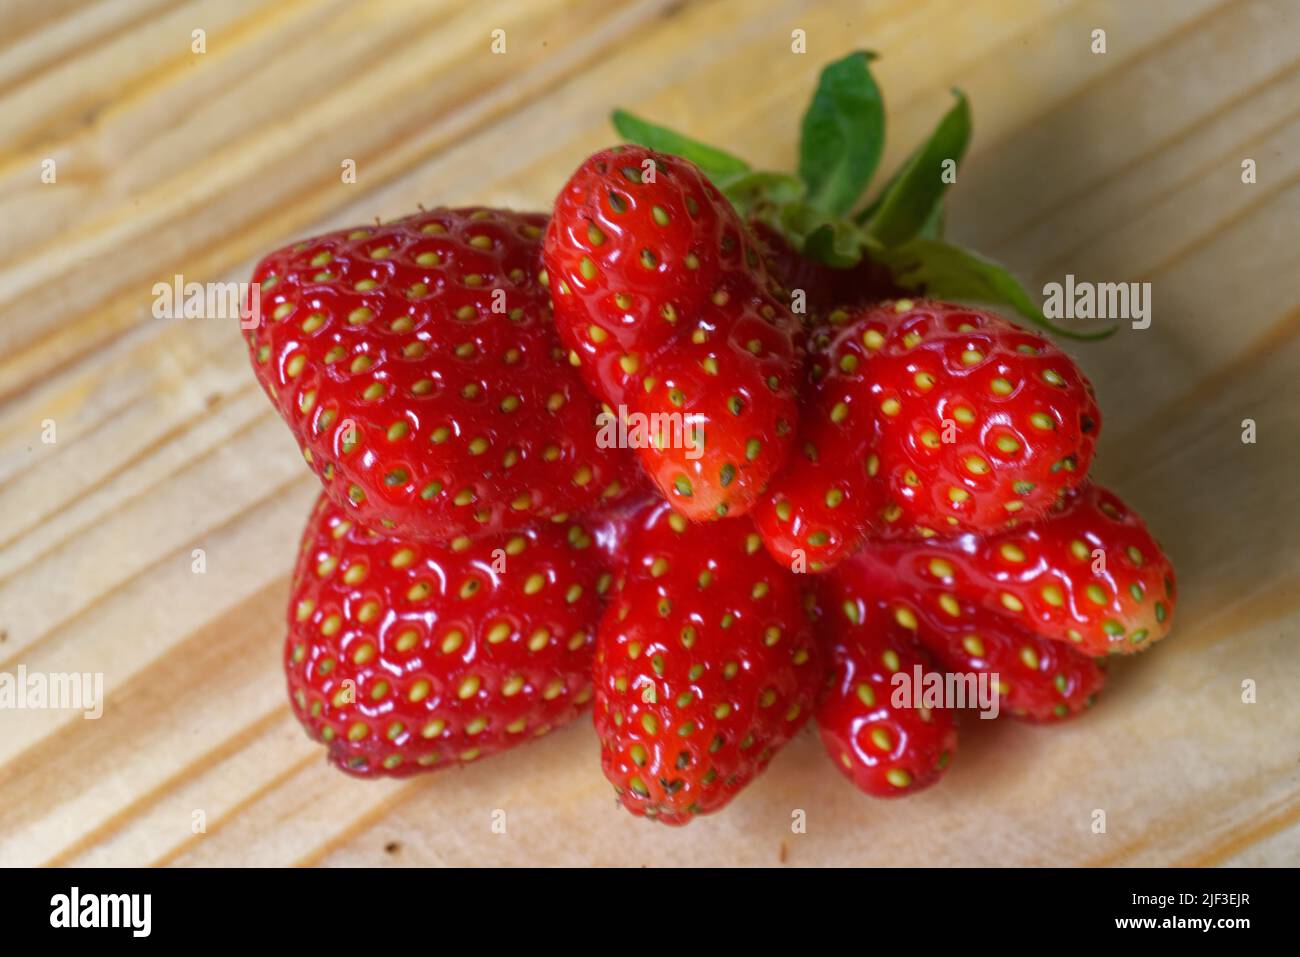 Garden strawberry (or simply strawberry; Fragaria × ananassa) is a widely grown hybrid species of the genus Fragaria, collectively known as the strawb Stock Photo